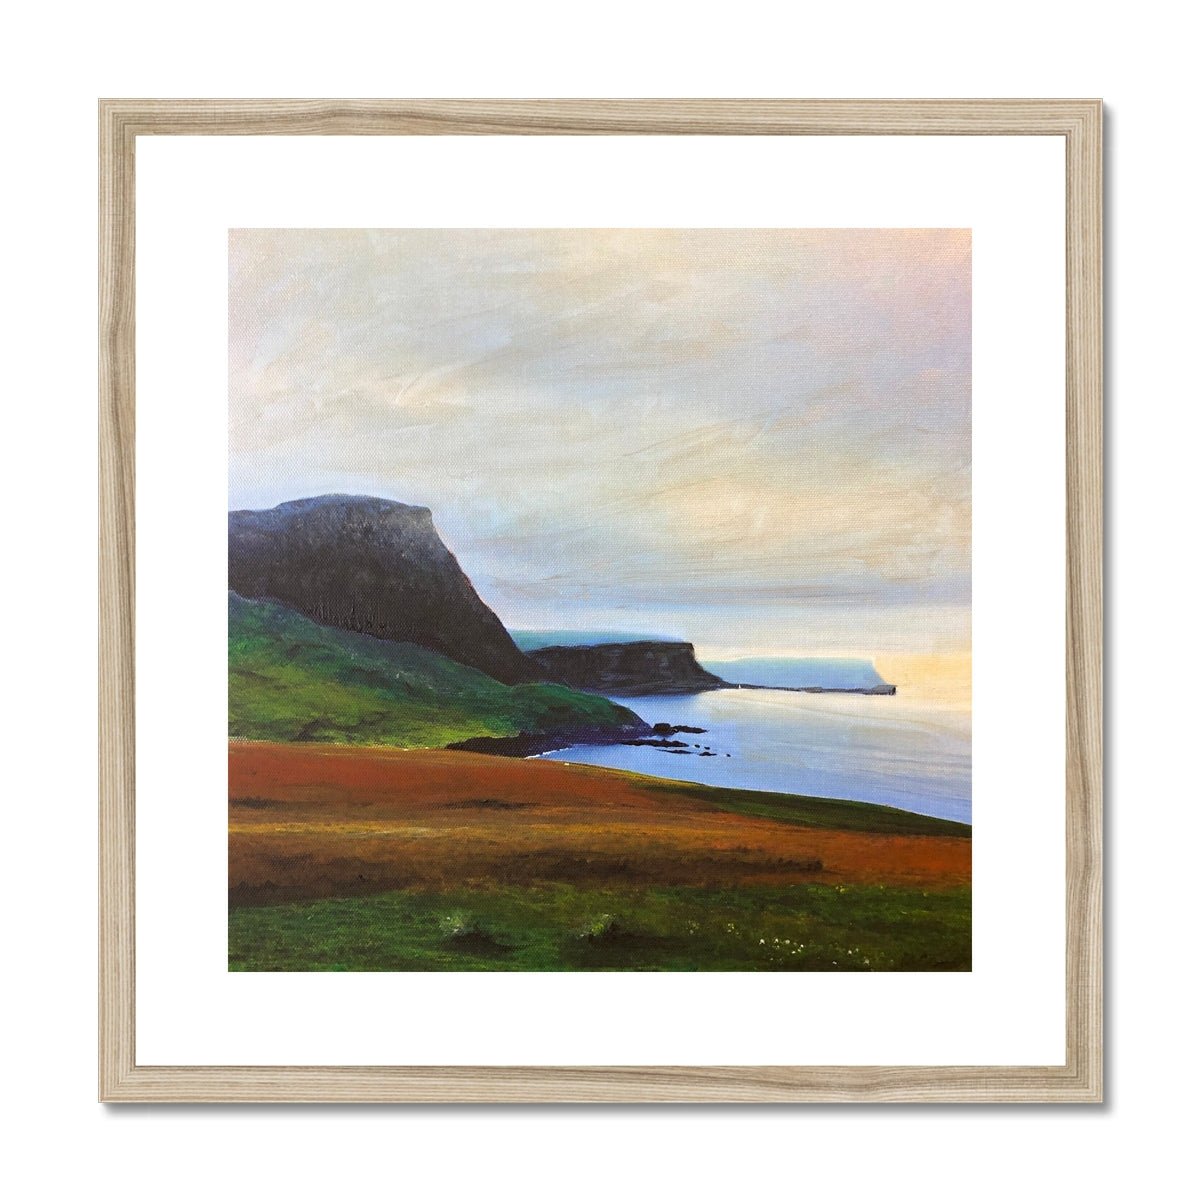 Neist Point Cliffs Skye Painting | Framed & Mounted Prints From Scotland-Framed & Mounted Prints-Skye Art Gallery-20"x20"-Natural Frame-Paintings, Prints, Homeware, Art Gifts From Scotland By Scottish Artist Kevin Hunter